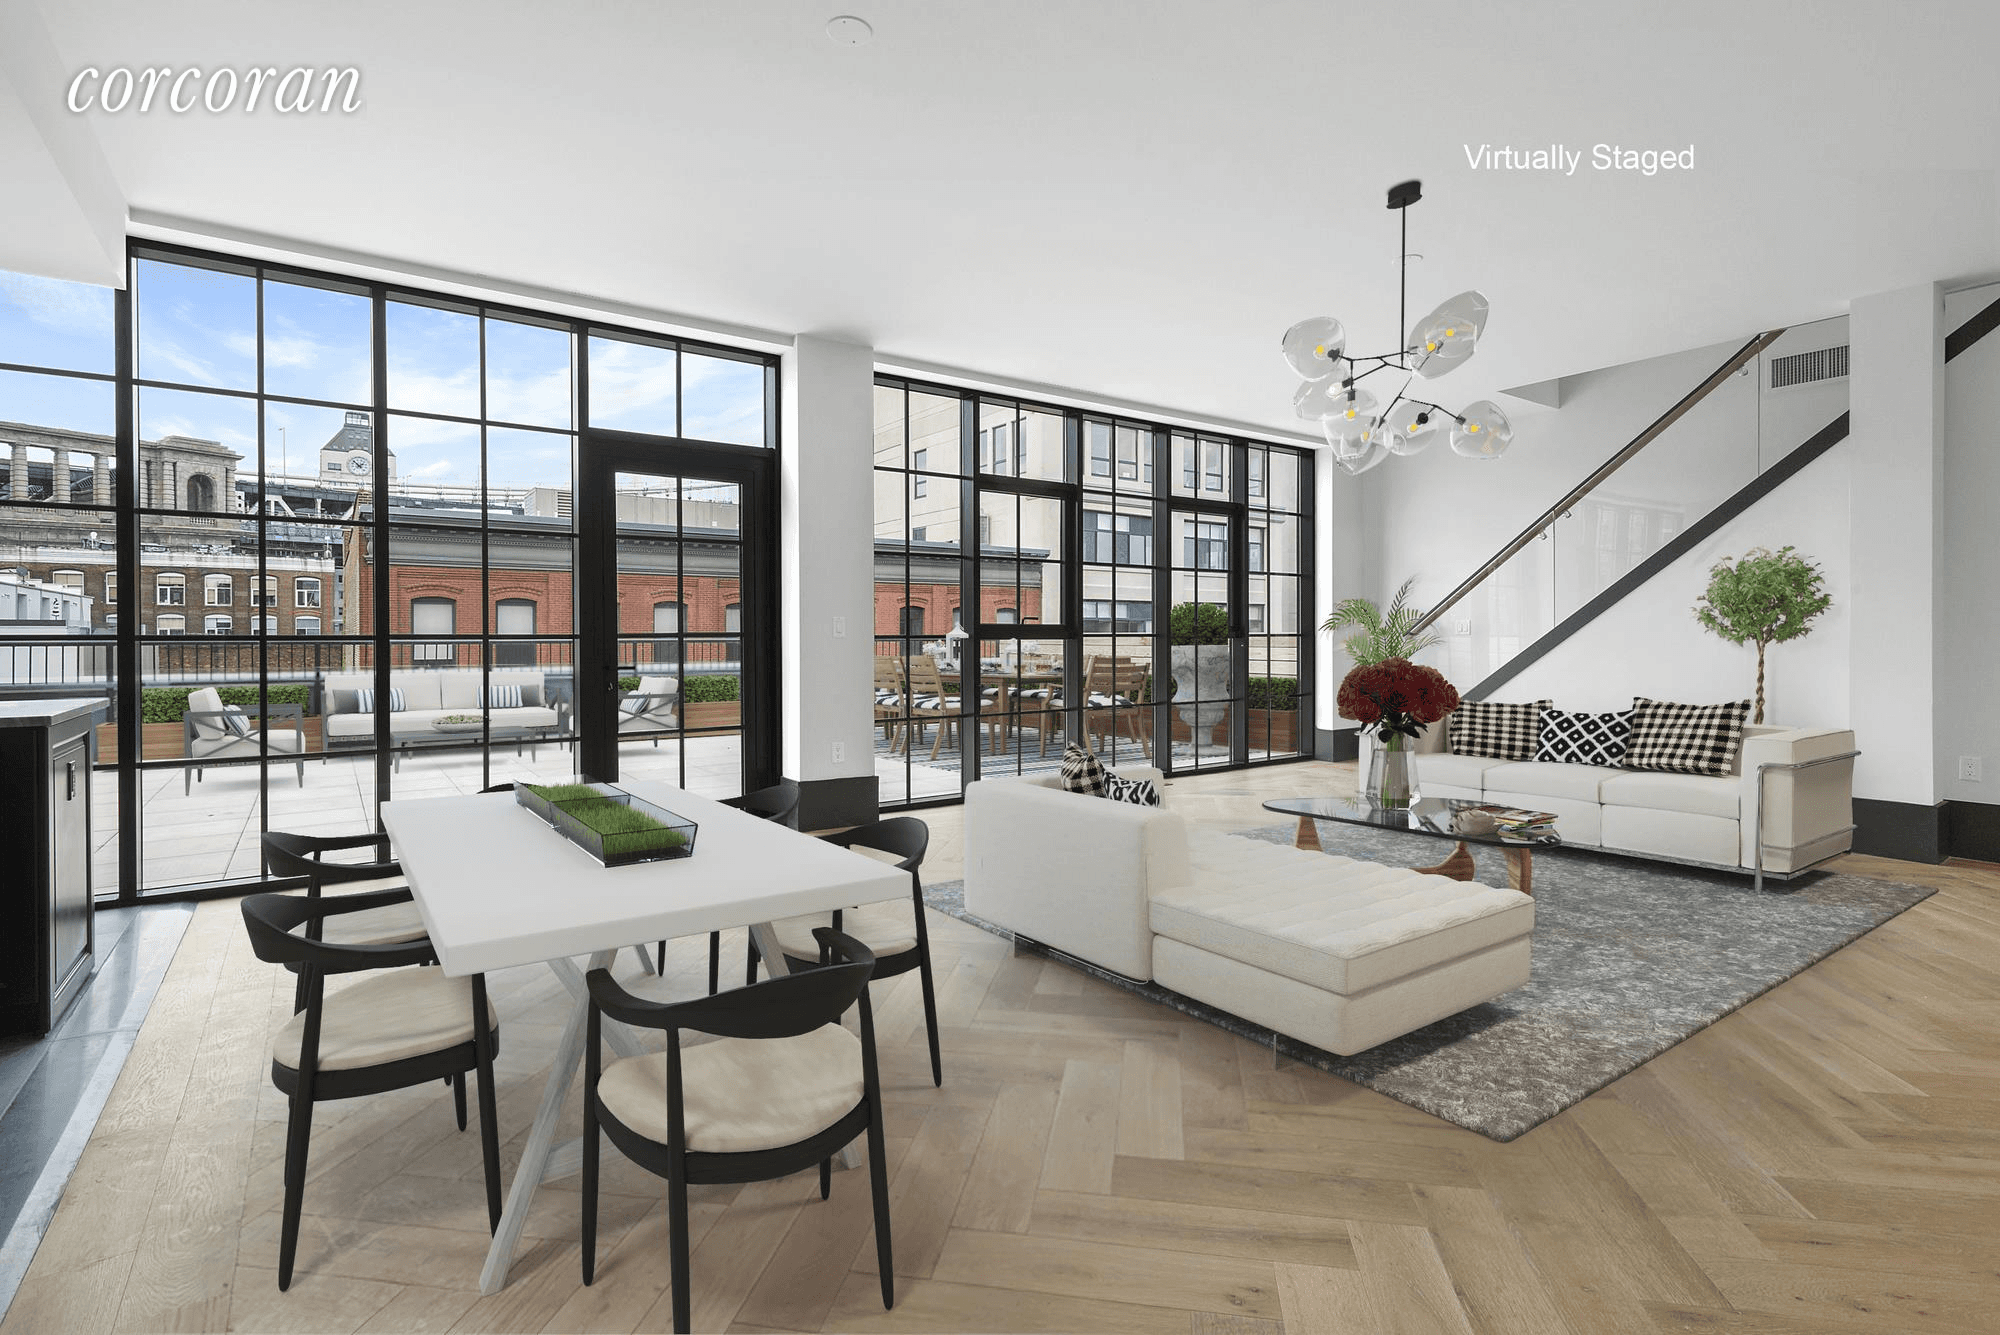 3 Bedroom 4 Bath Duplex Penthouse with Amazing Private Terrace and Reserved Parking Space in Dumbo's Newest Full Service Luxury Building 51 Jay Street.